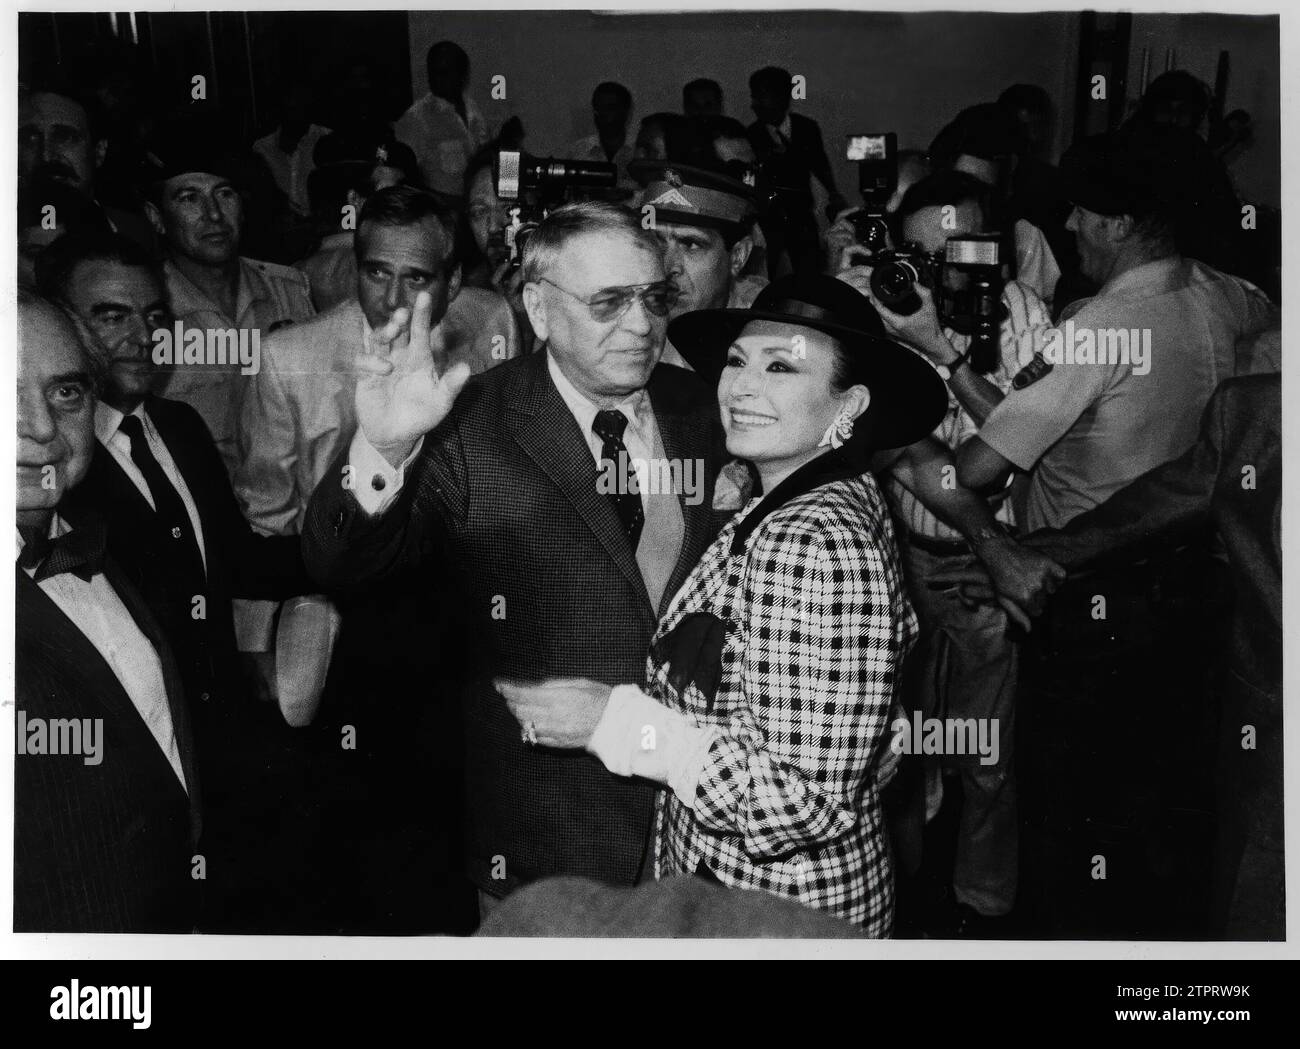 Madrid, 09/23/1986. Frank Sinatra arrives at the Barajas airport and is greeted by Rocío Jurado, for his performance at the Santiago Bernabeu. Credit: Album / Archivo ABC / Luis Ramírez Stock Photo